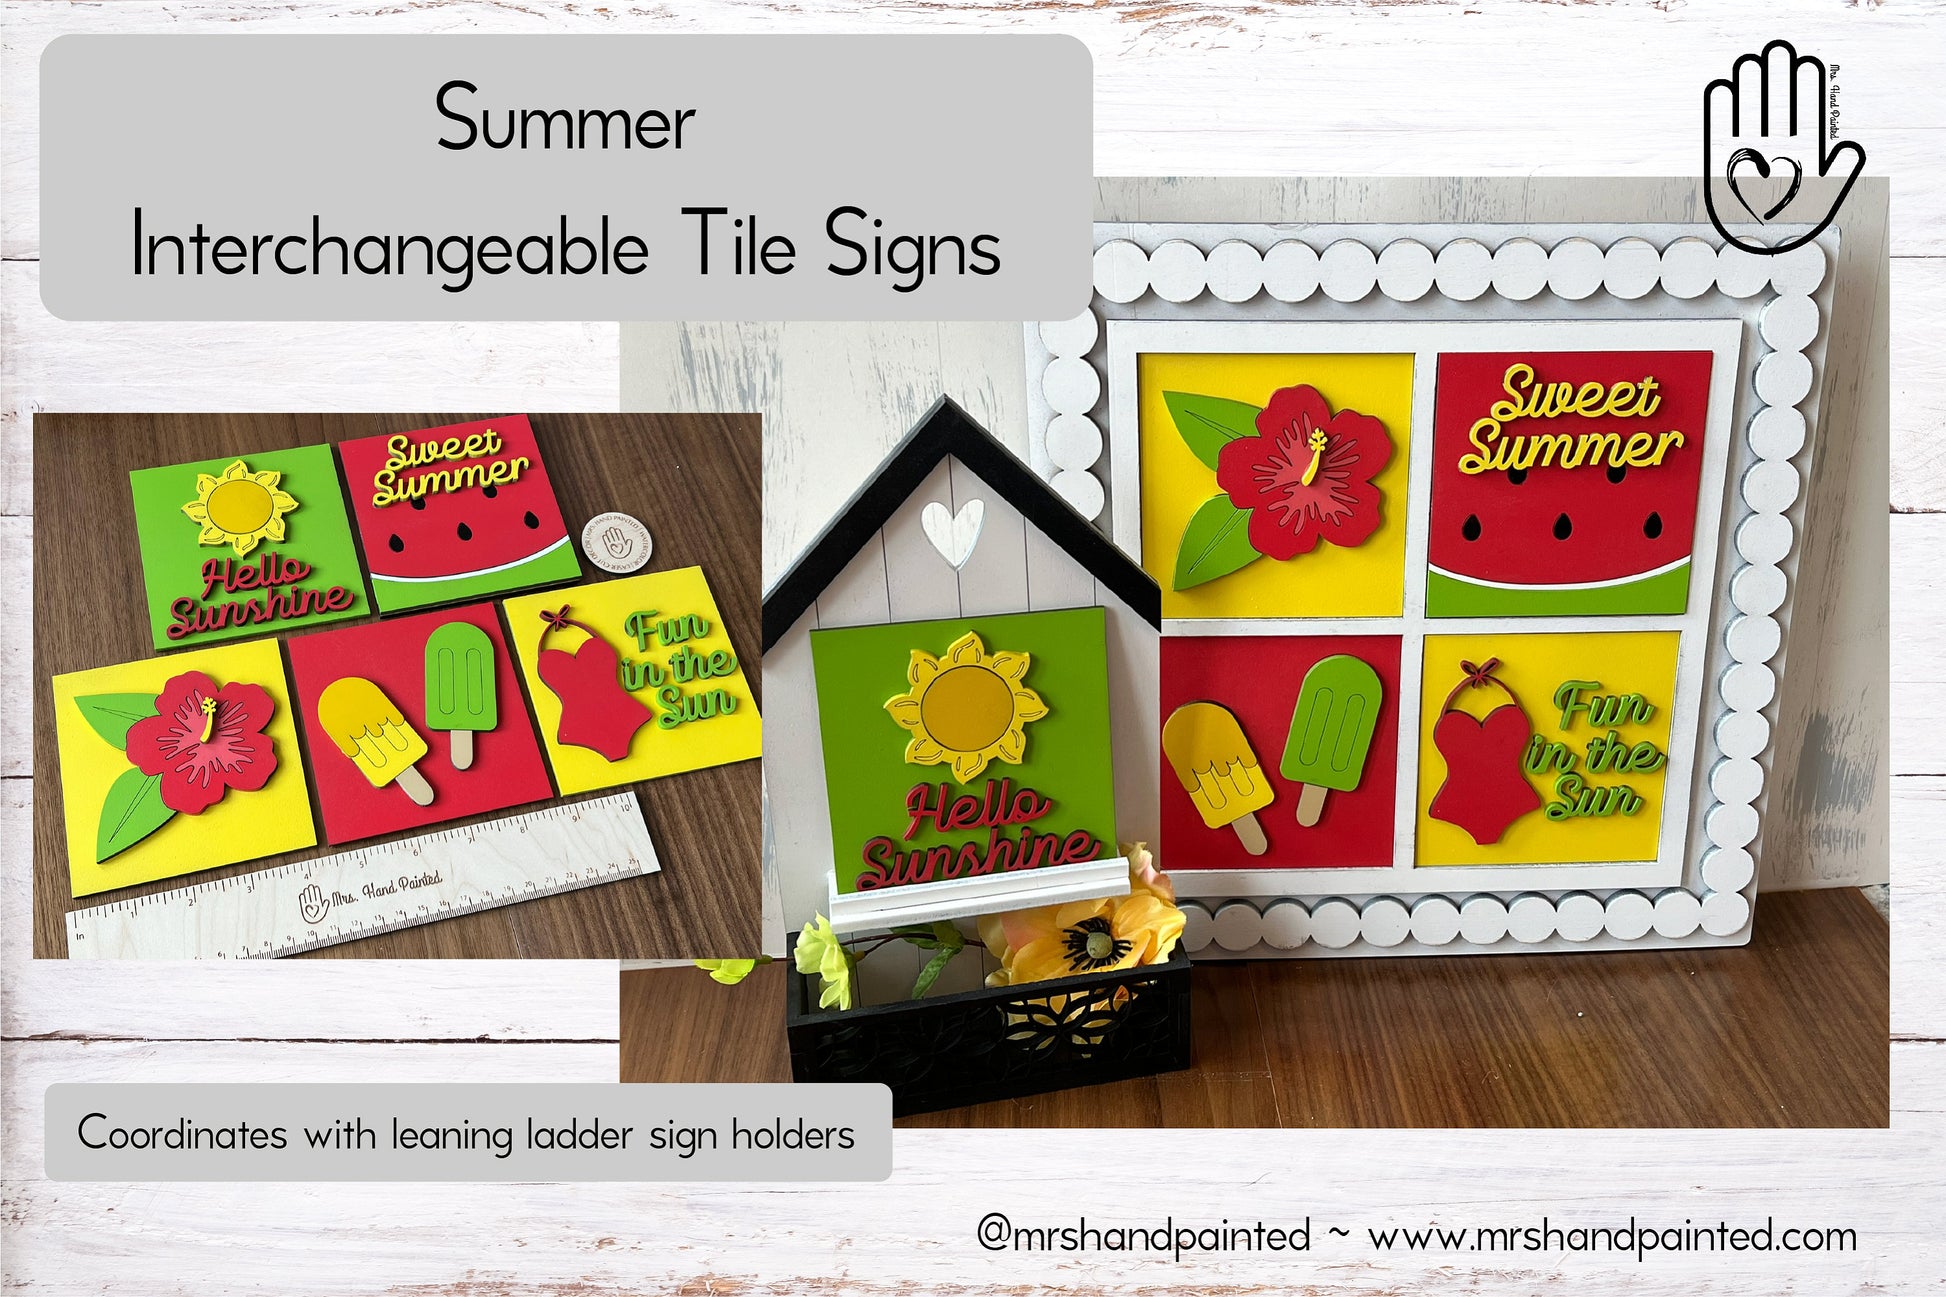 Summer Interchangeable Signs - Laser Cut Wood Painted